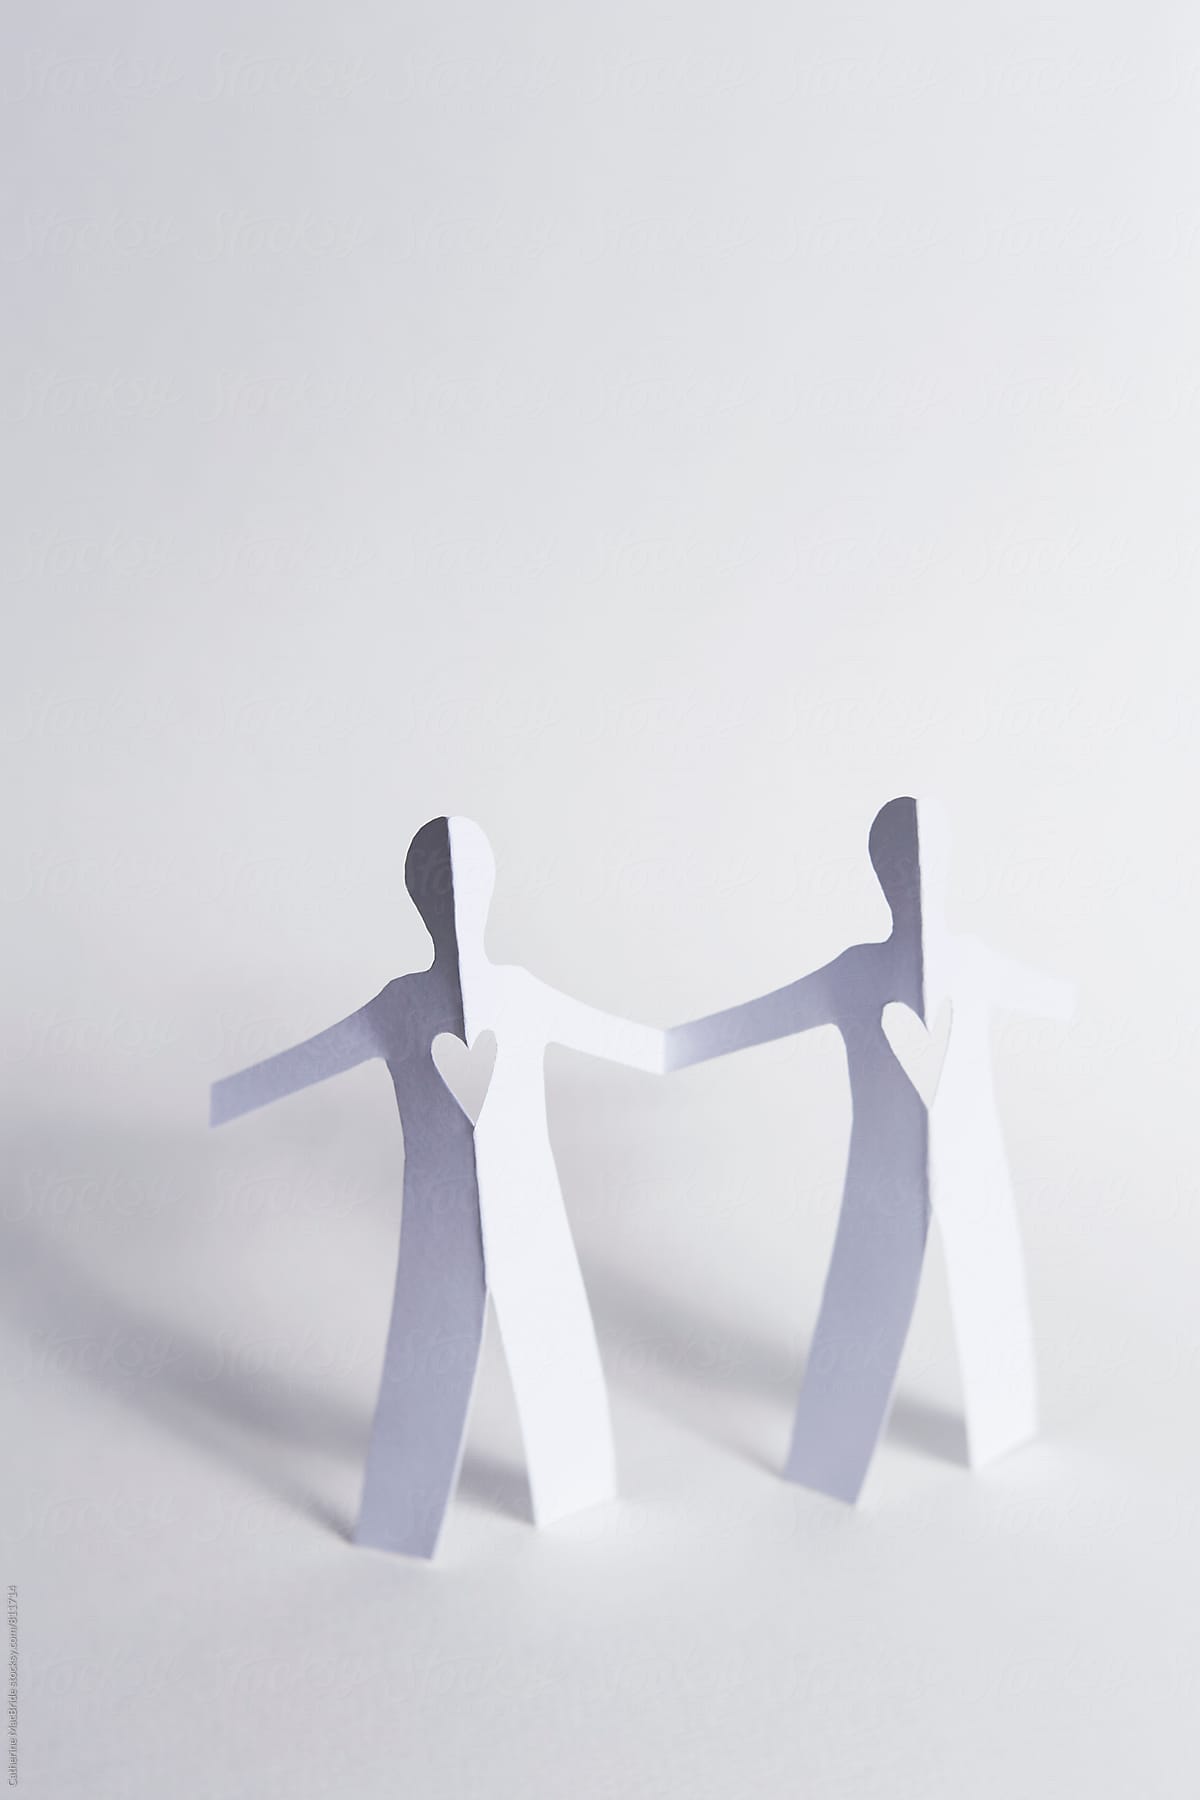 Two paper people...